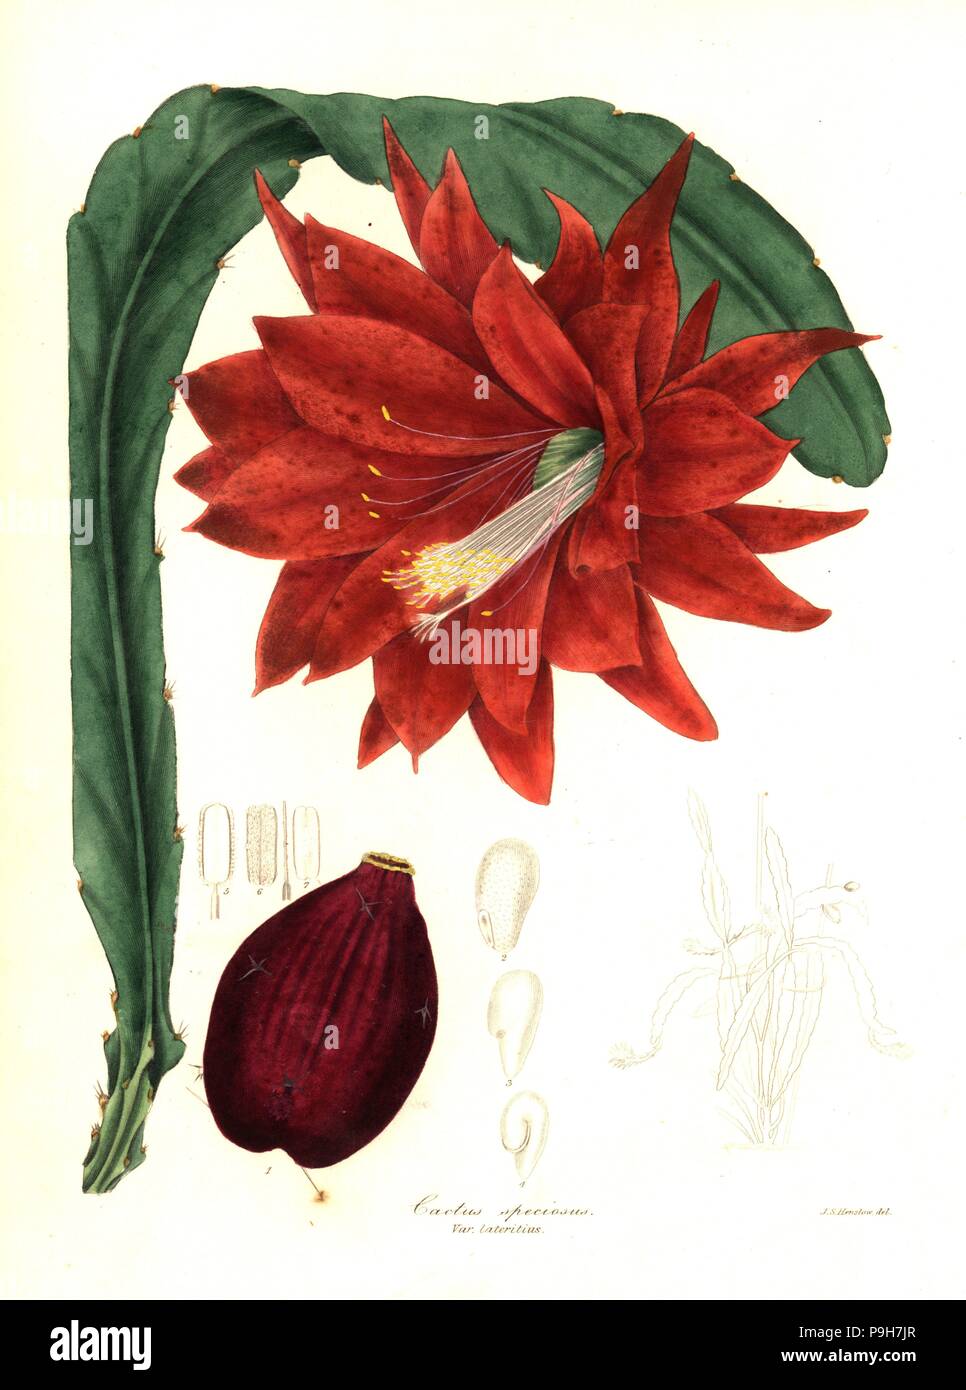 Heliocereus speciosus and seed (Showy brick-red cactus, Cactus speciosus var. latertius). Handcoloured copperplate engraving after a botanical illustration by Rev. J.S. Henslow from Benjamin Maund and the Rev. John Stevens Henslow's The Botanist, London, 1836. Stock Photo